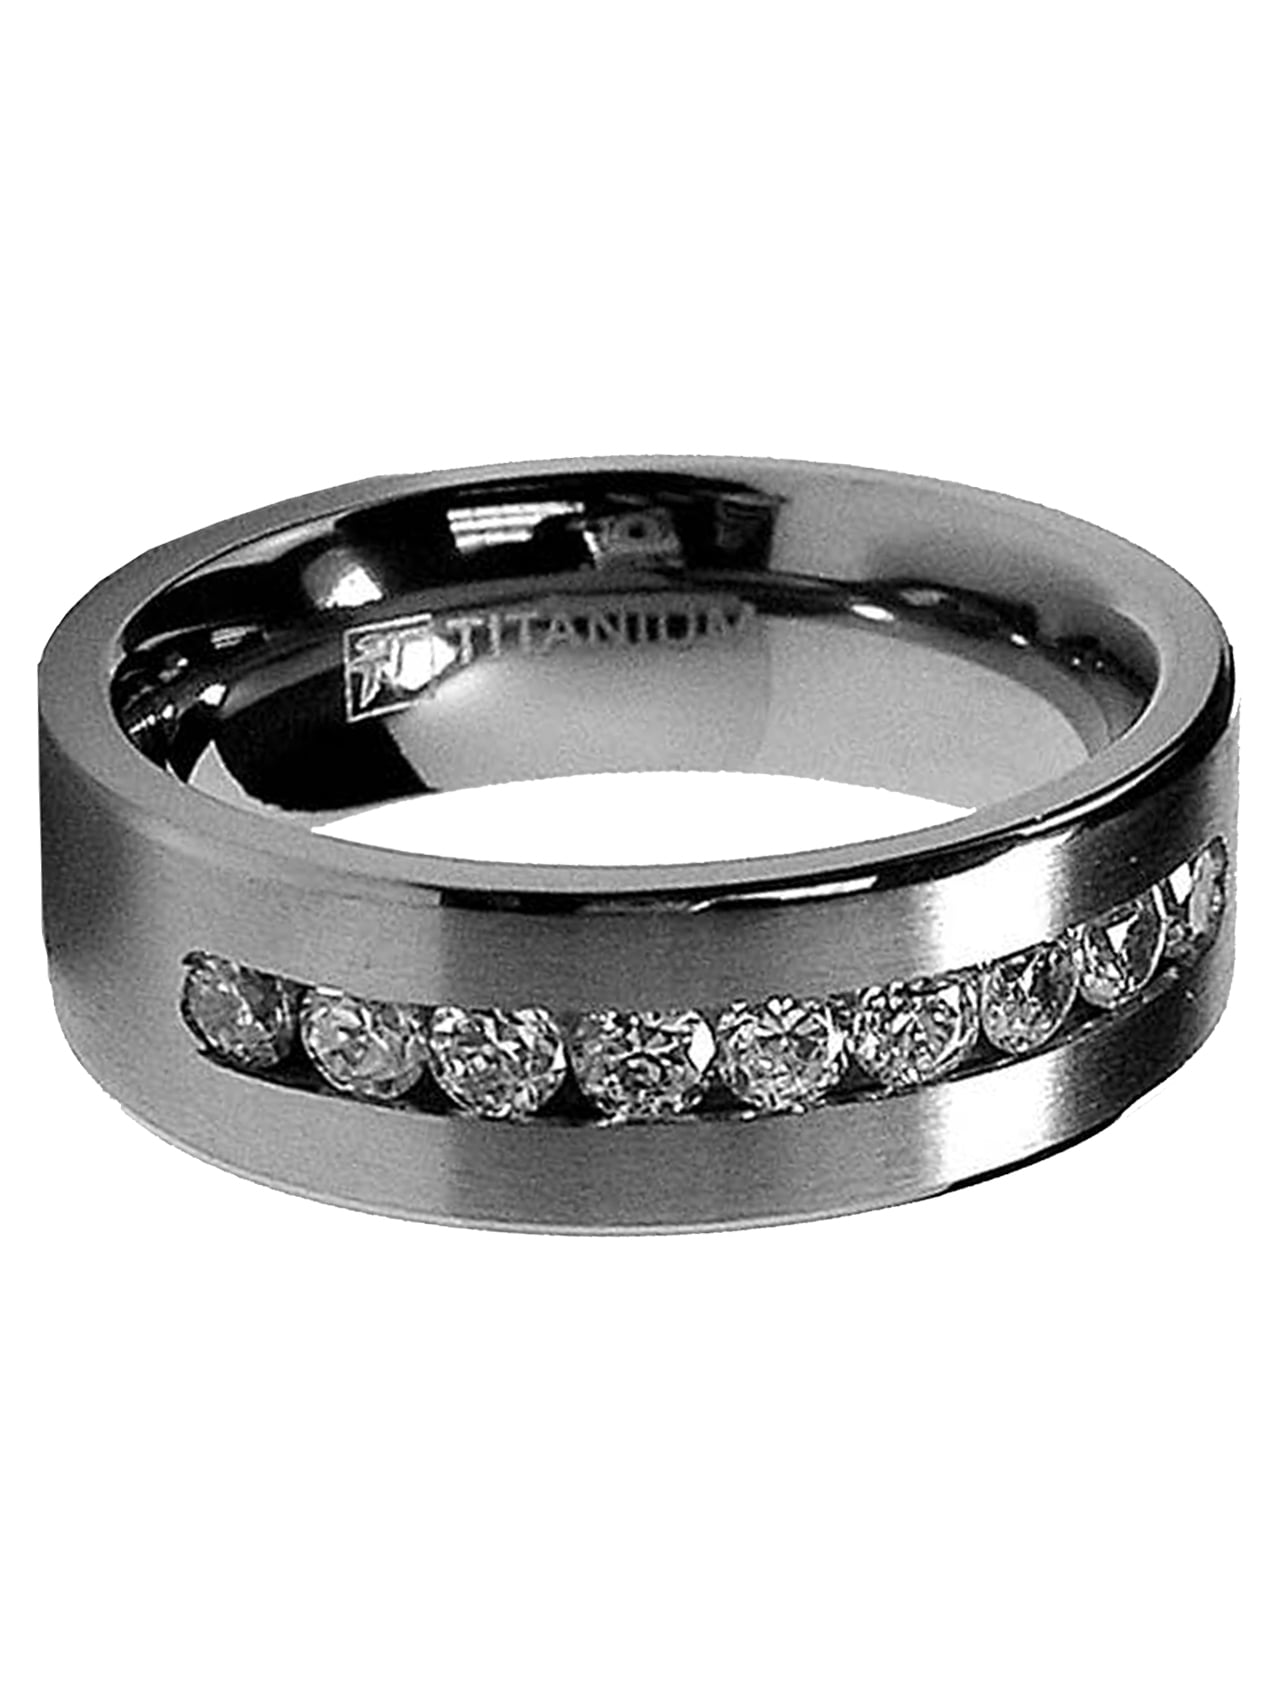 8 MM Men's Titanium Ring Wedding Band with 9 Large Channel Set Cubic Zirconia CZ Sizes 6 to 15 